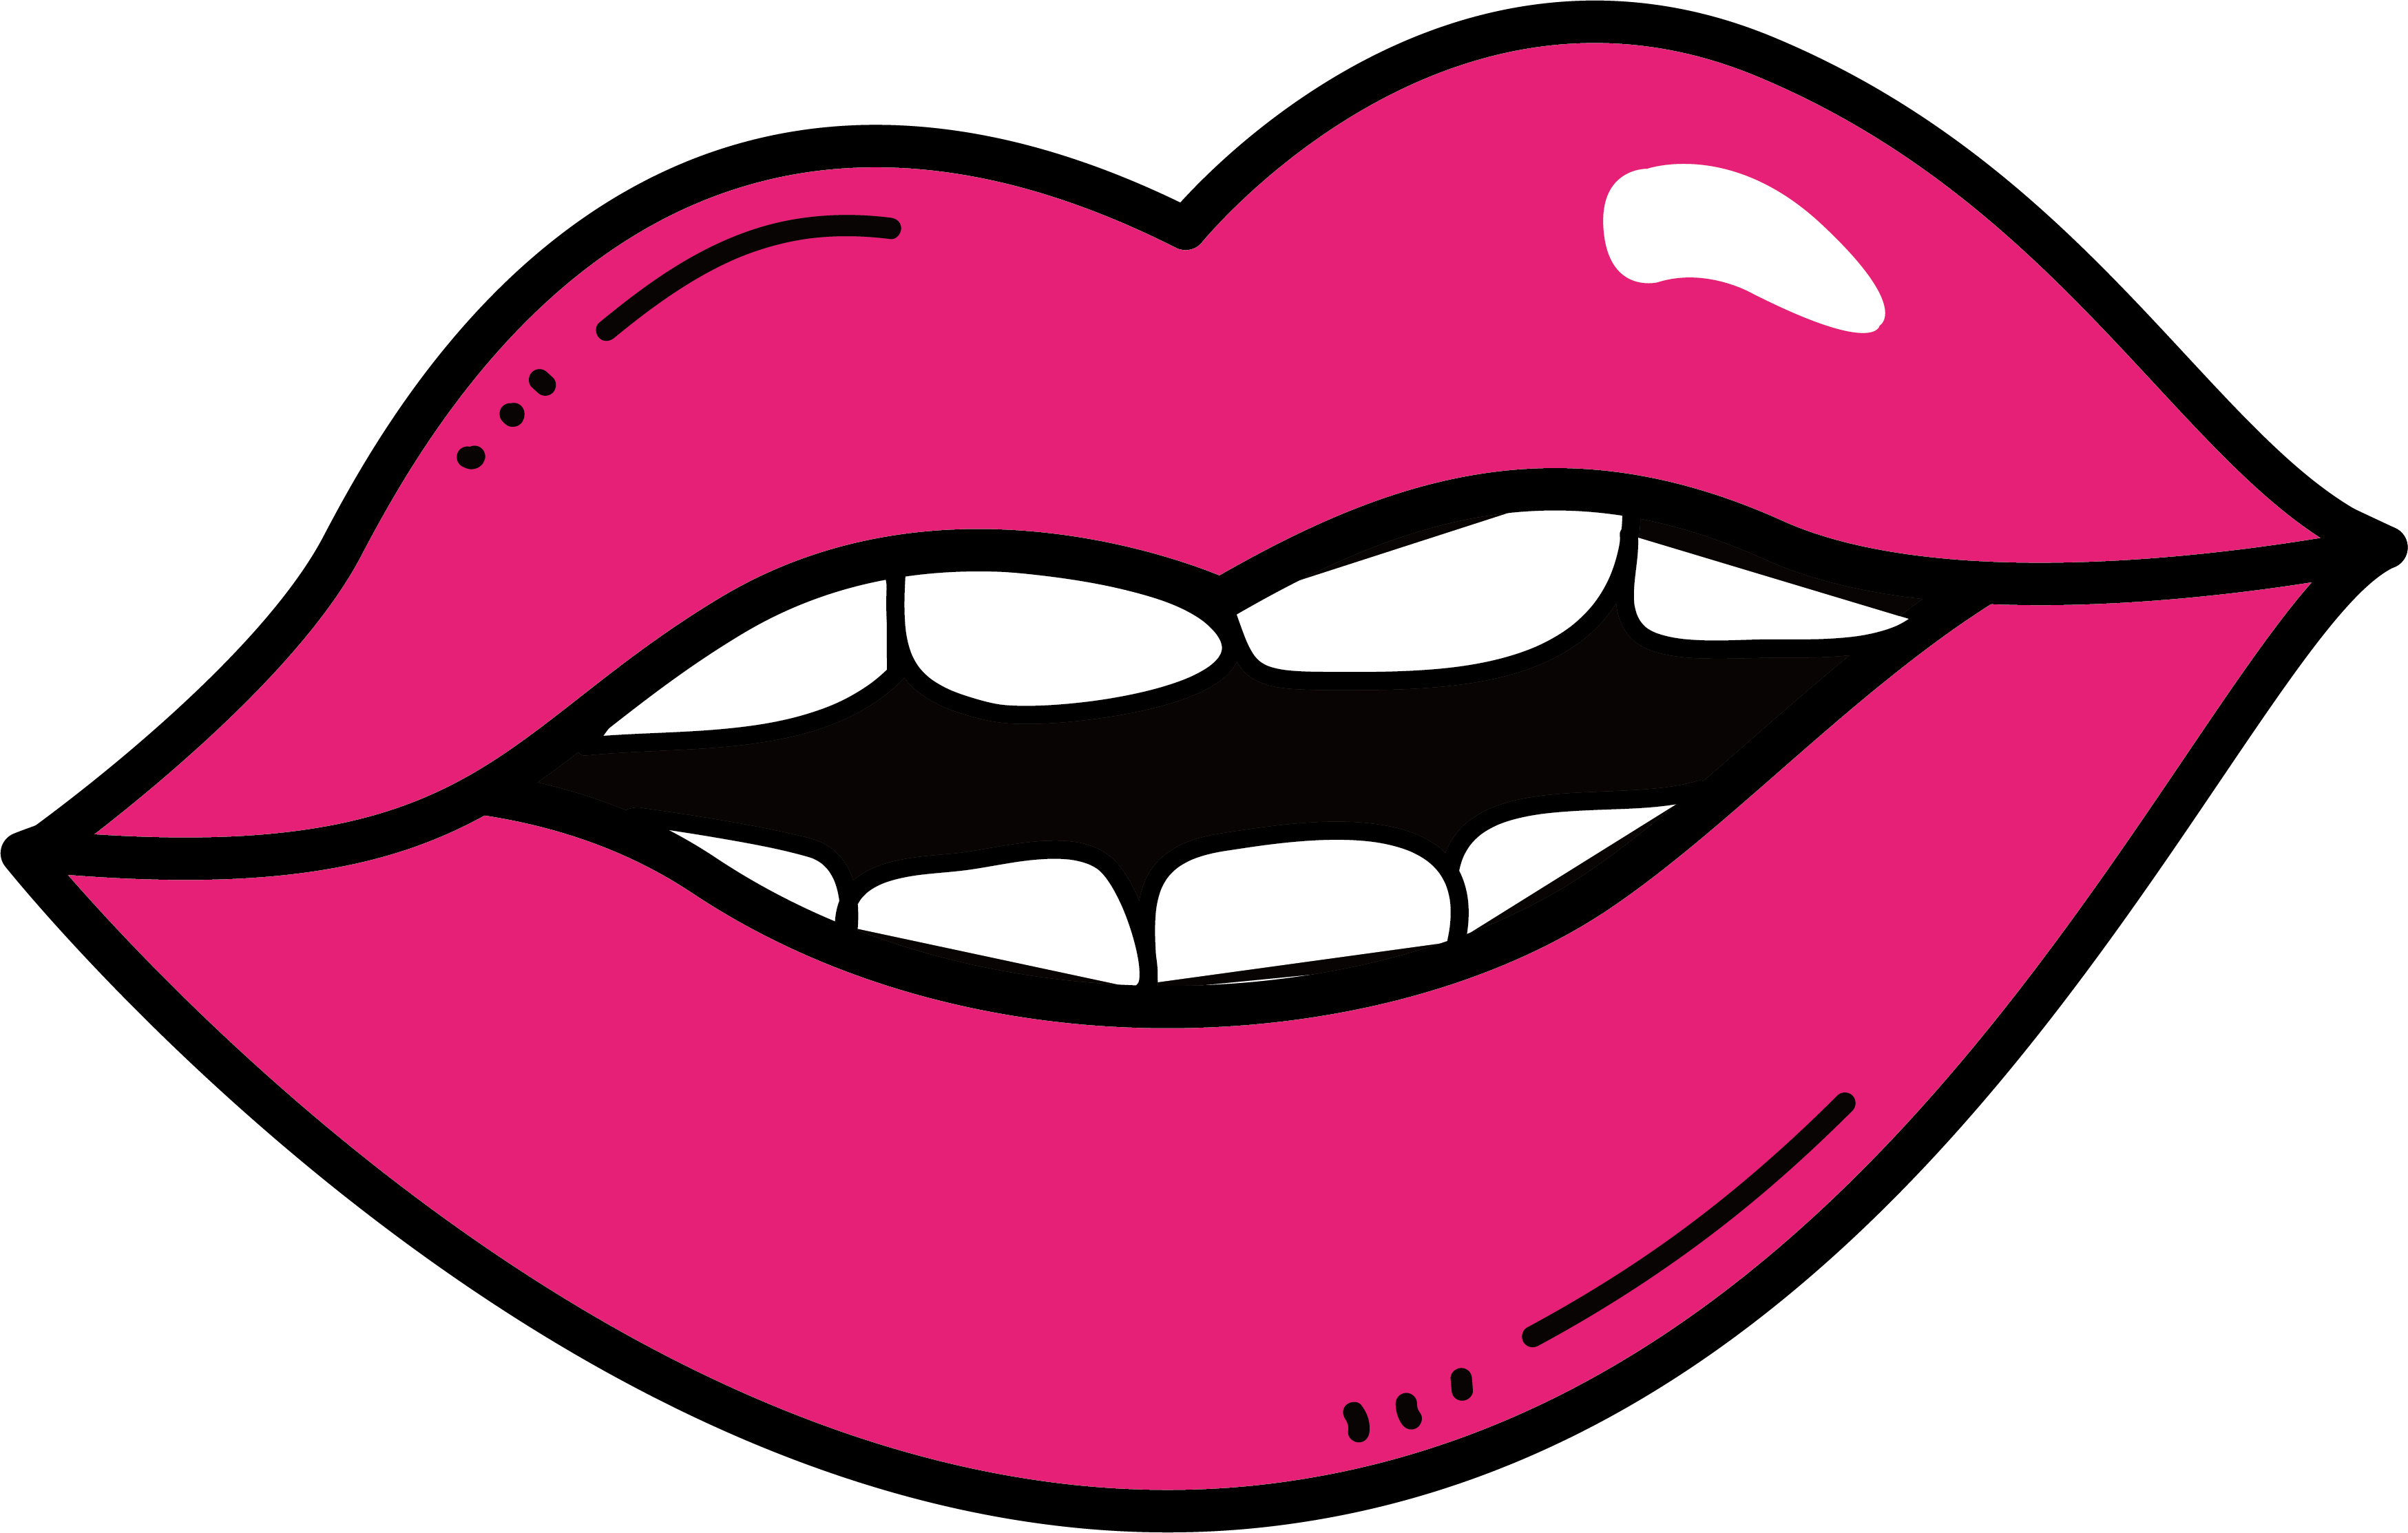 Clipart mouth mouth expression. Lip drawing clip art